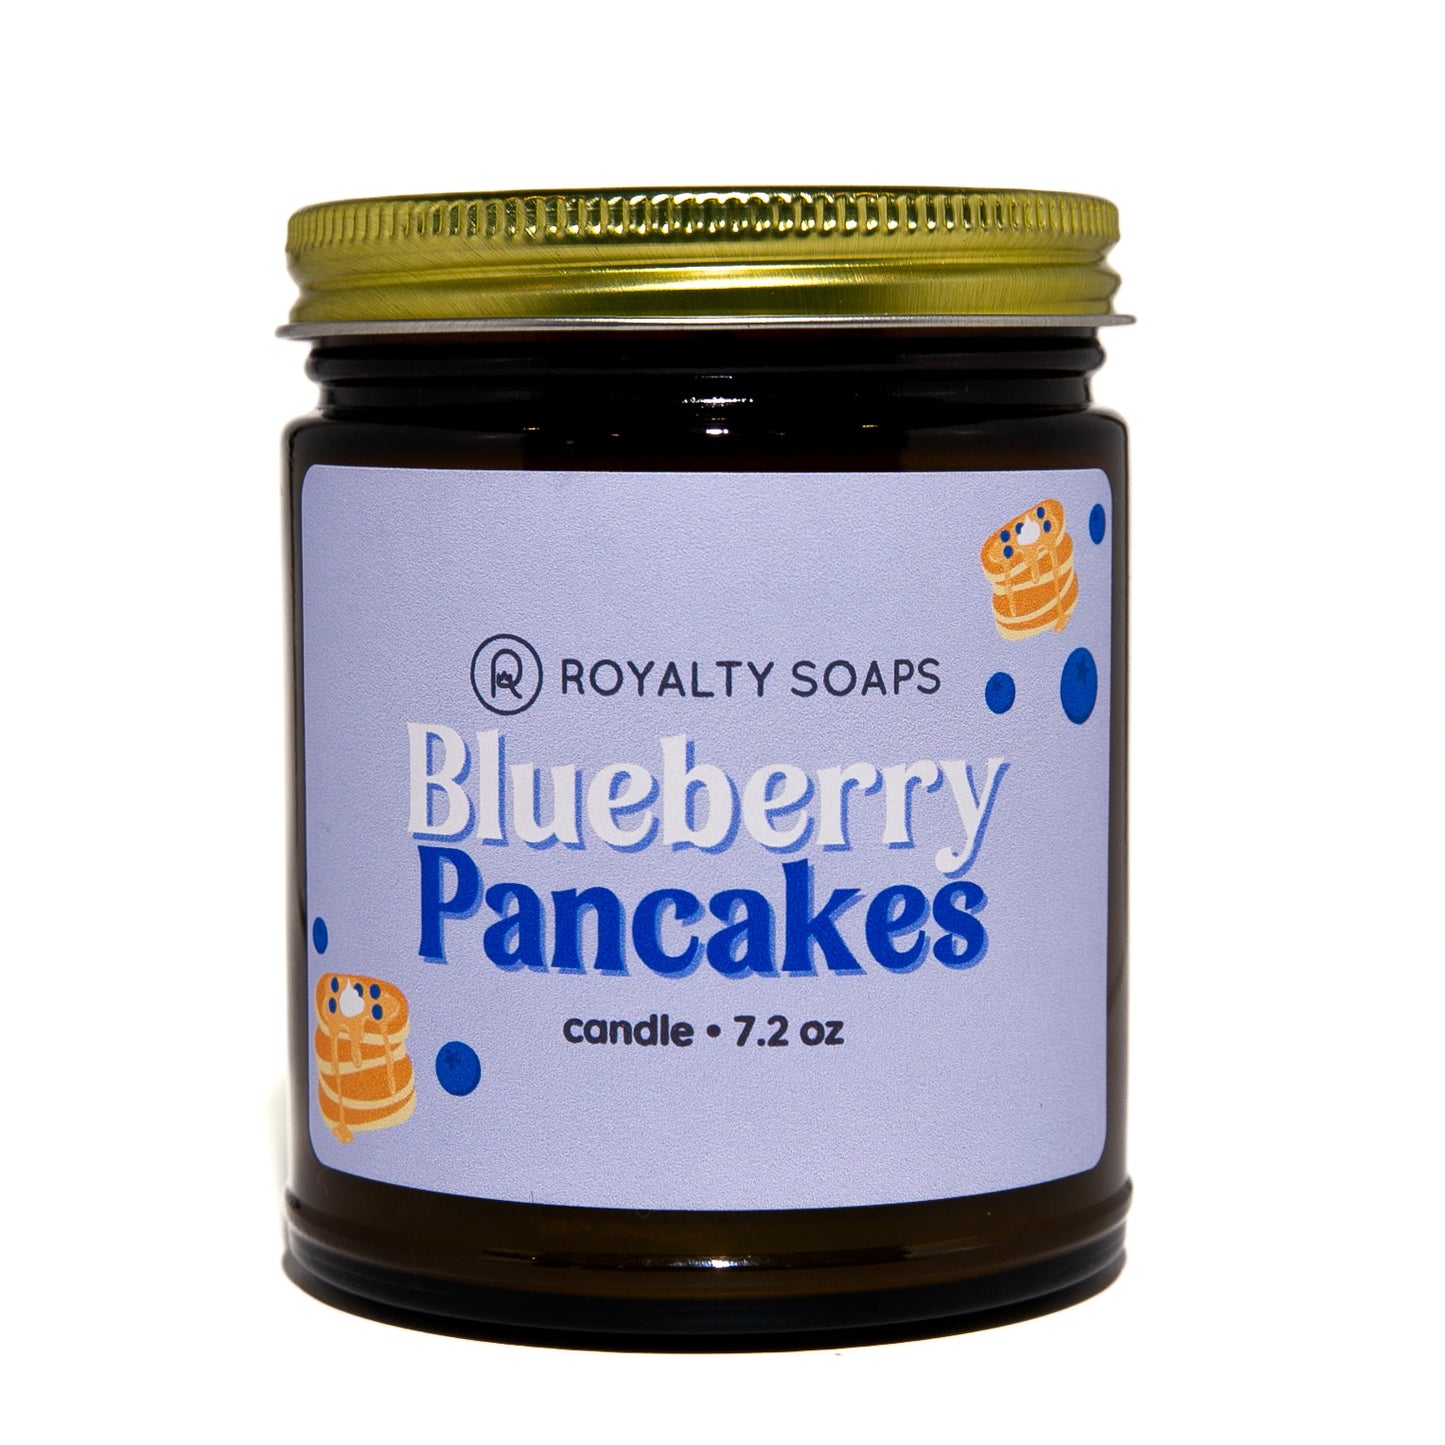 Blueberry Pancakes Soy Candle